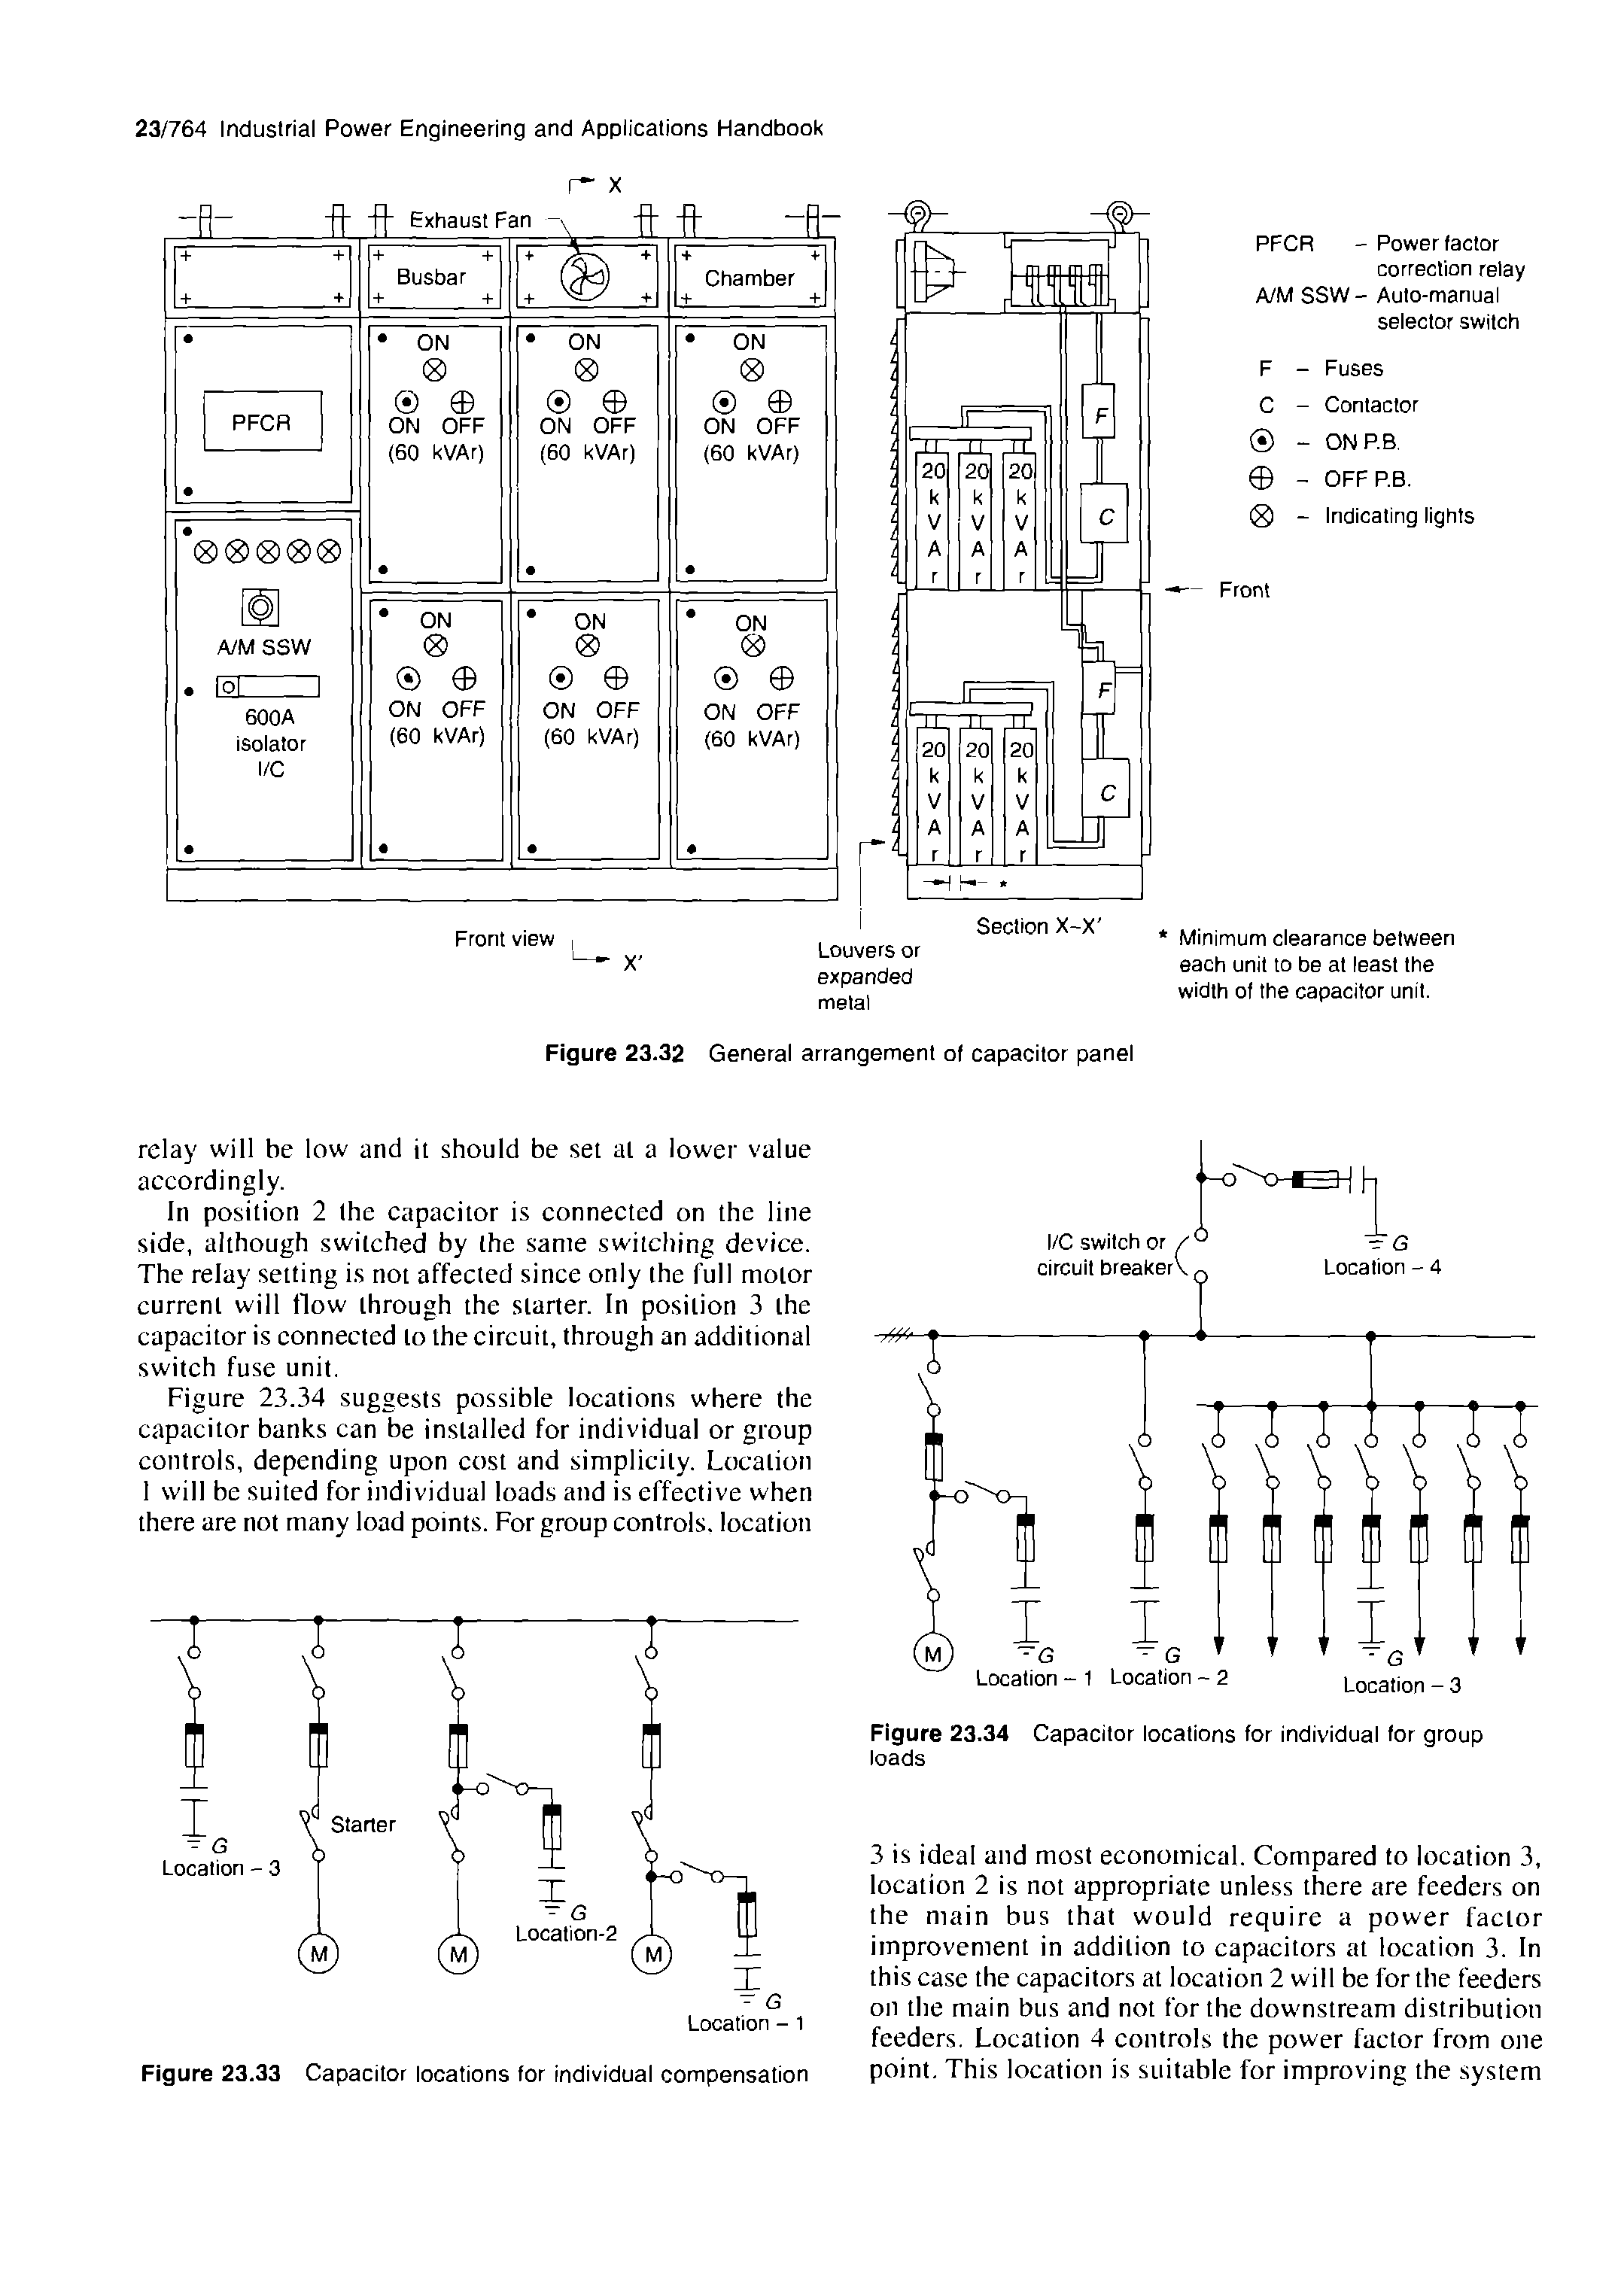 Figure 23.34 Capacitor locations for individual for group loads...